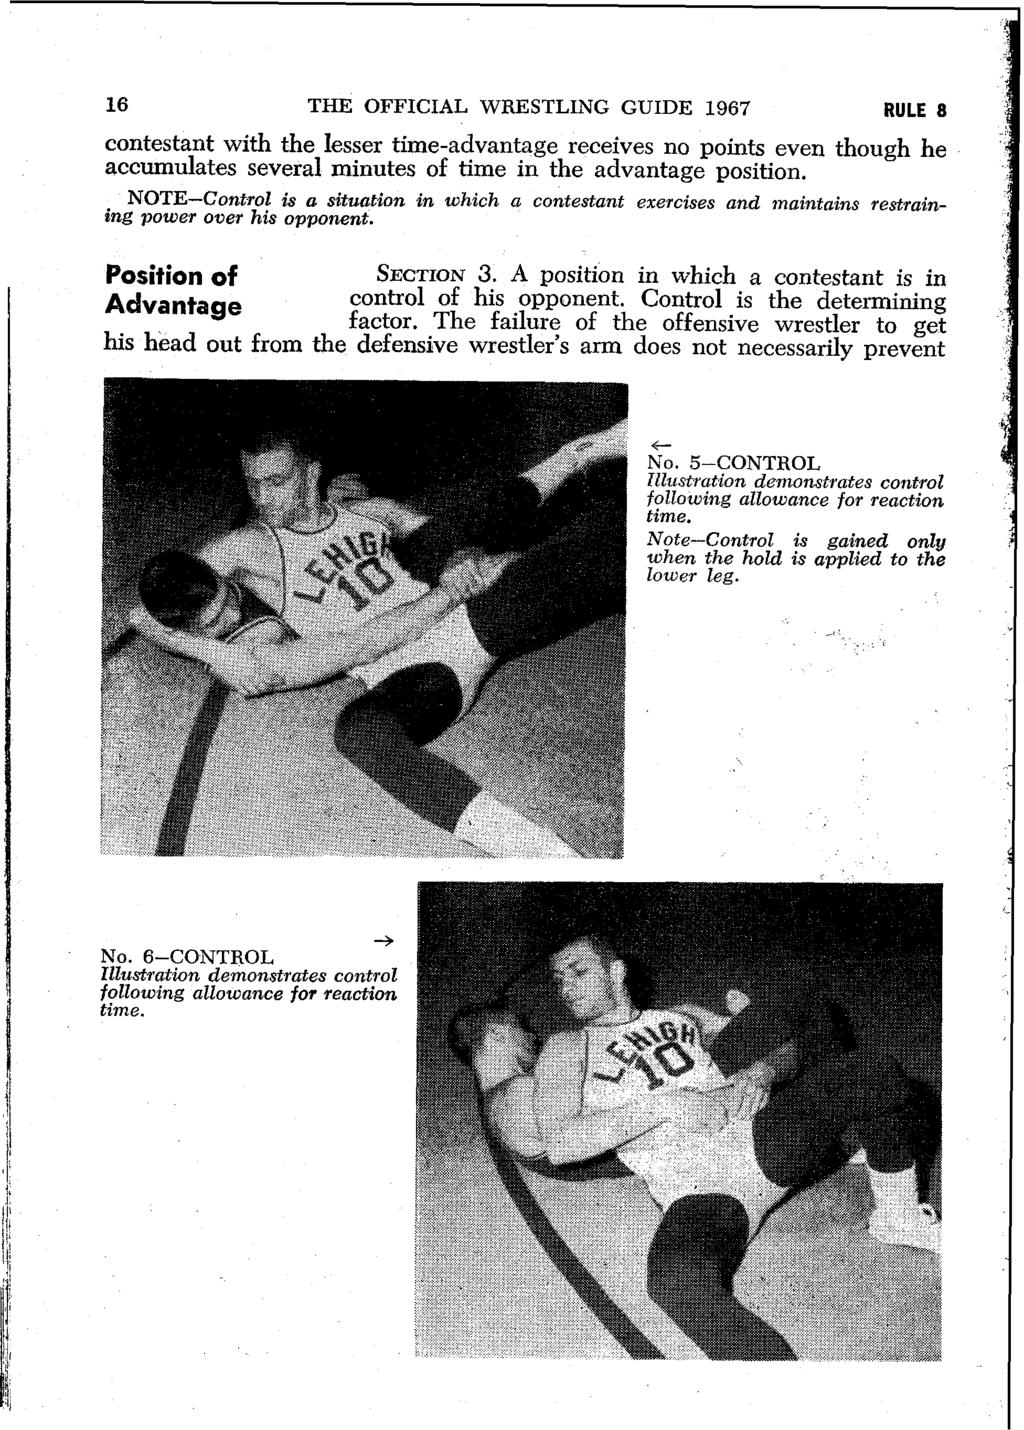 16 THE OFFICIAL WRESTLING GUIDE 1967 RULE 8 contestant with the lesser time-advantage receives no points even though he accumulates several minutes of time in the advantage position.